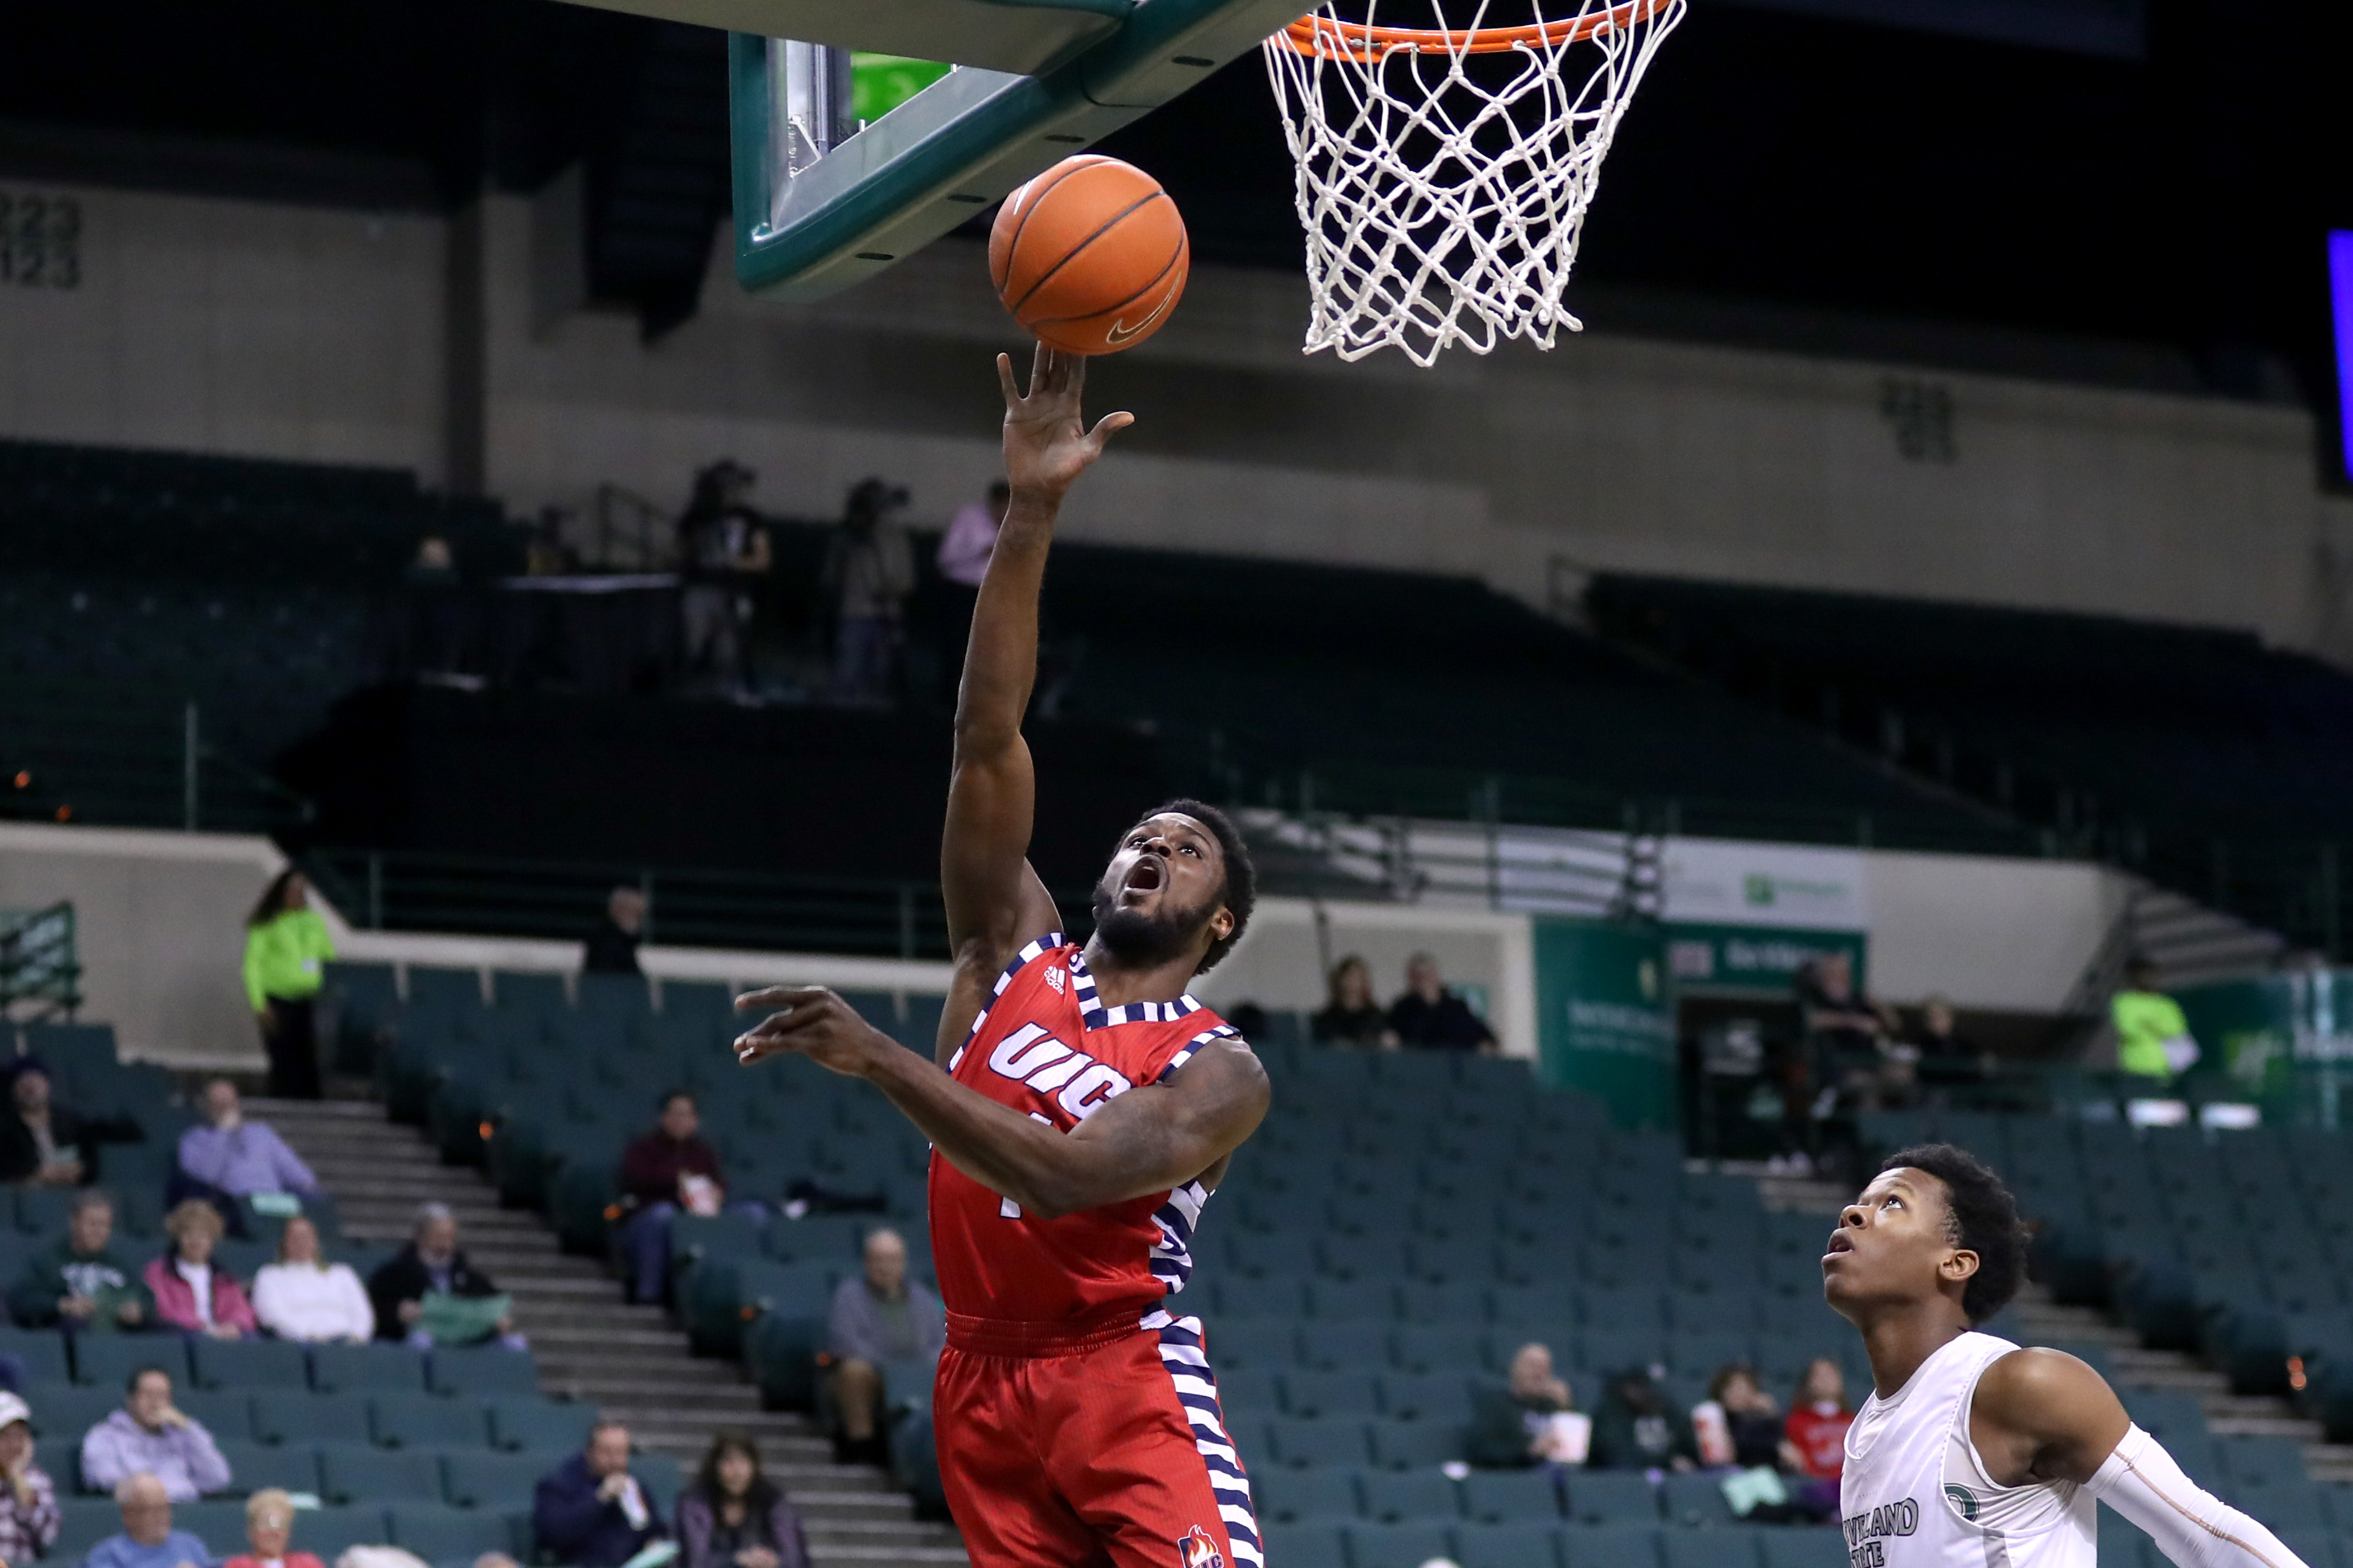 COLLEGE BASKETBALL: FEB 14 UIC at Cleveland State